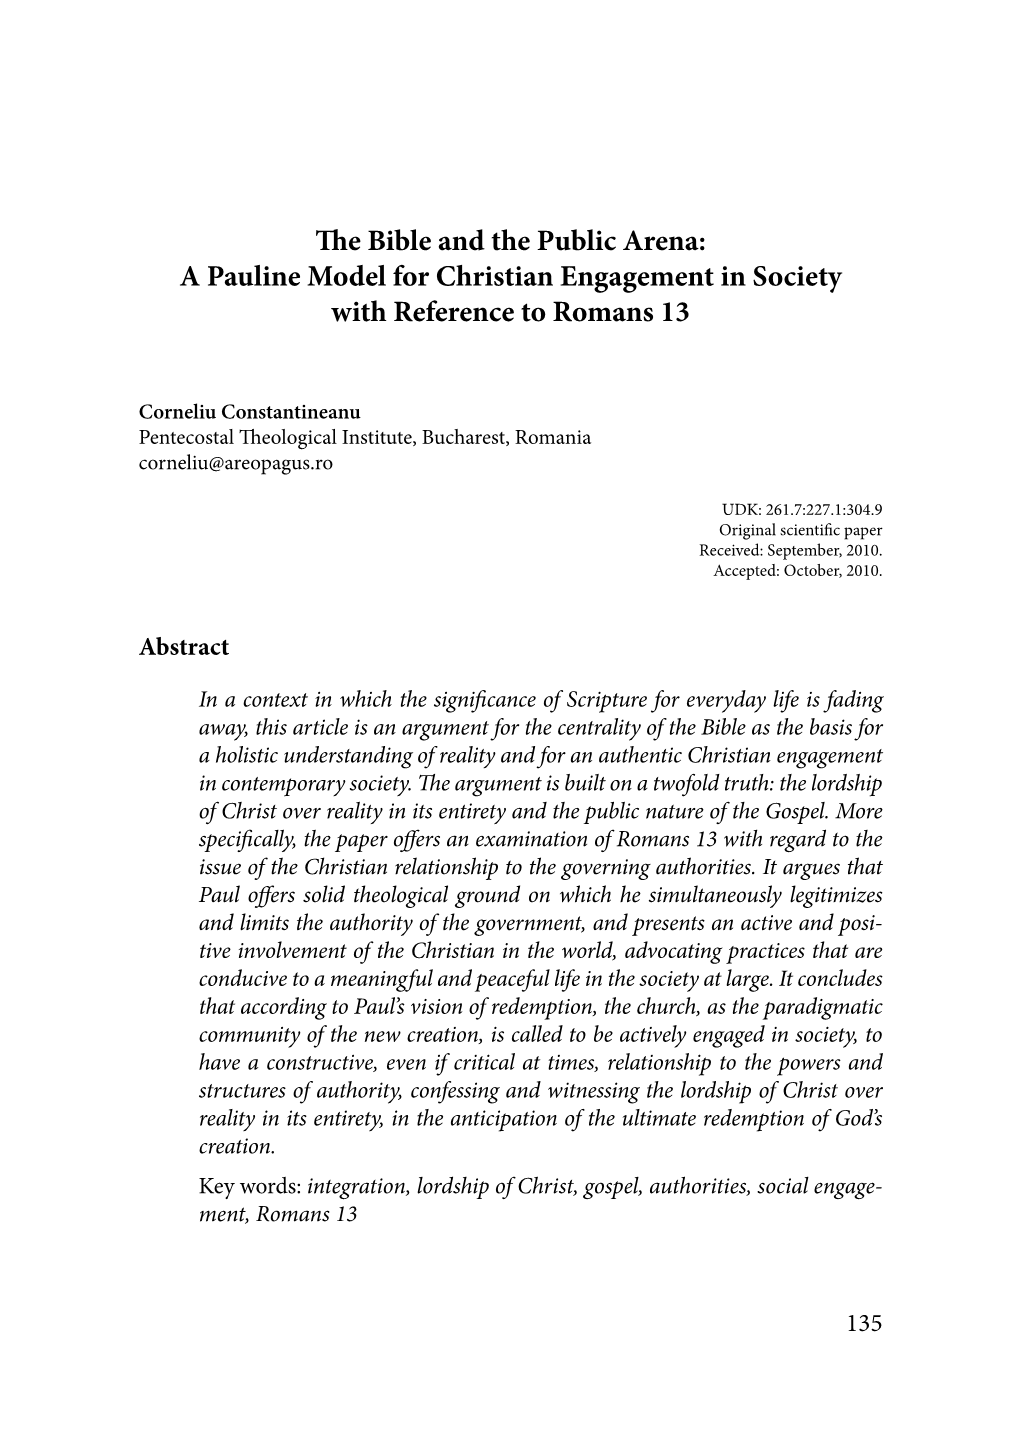 The Bible and the Public Arena: a Pauline Model for Christian Engagement in Society with Reference to Romans 13